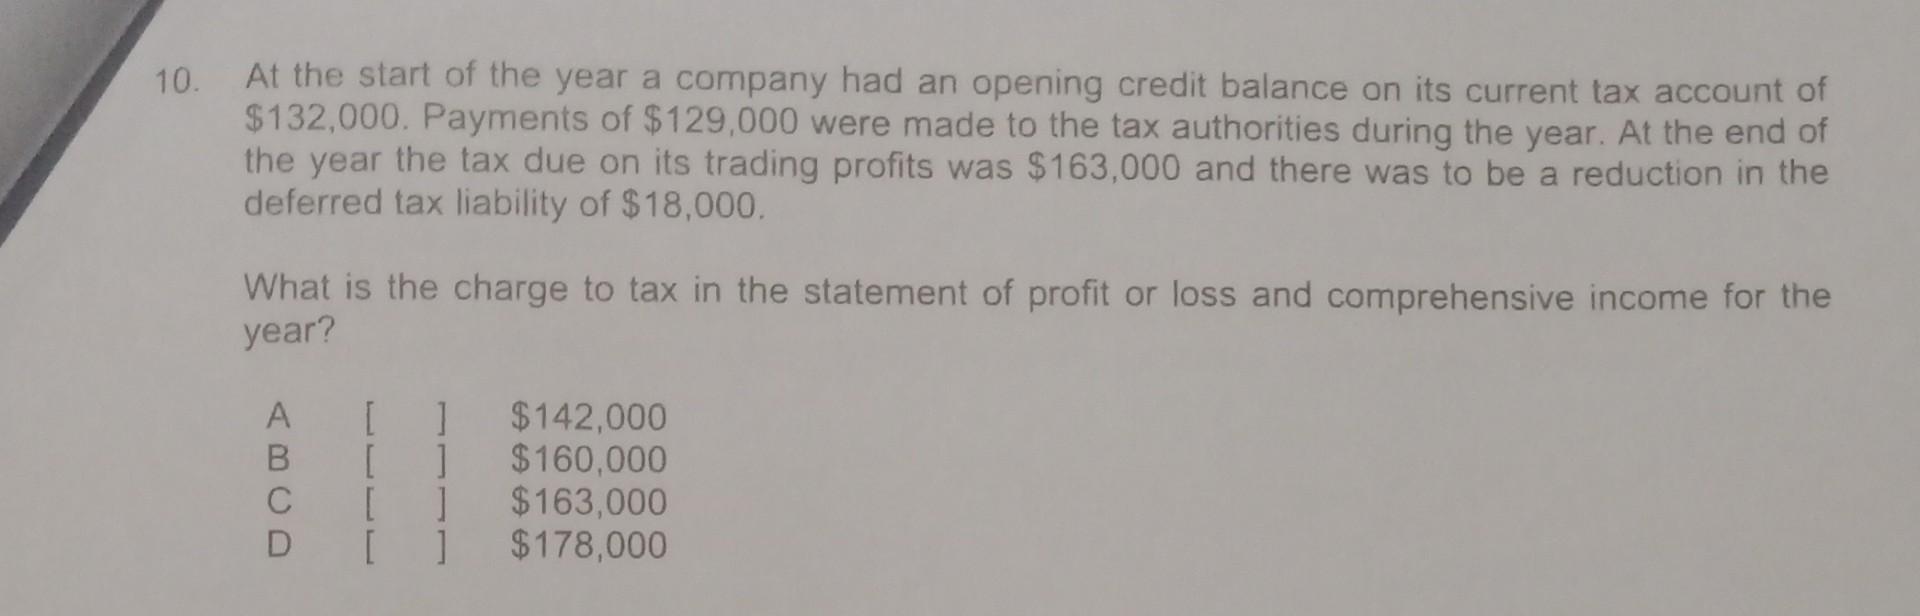 10. At the start of the year a company had an opening credit balance on its current tax account of $132,000.